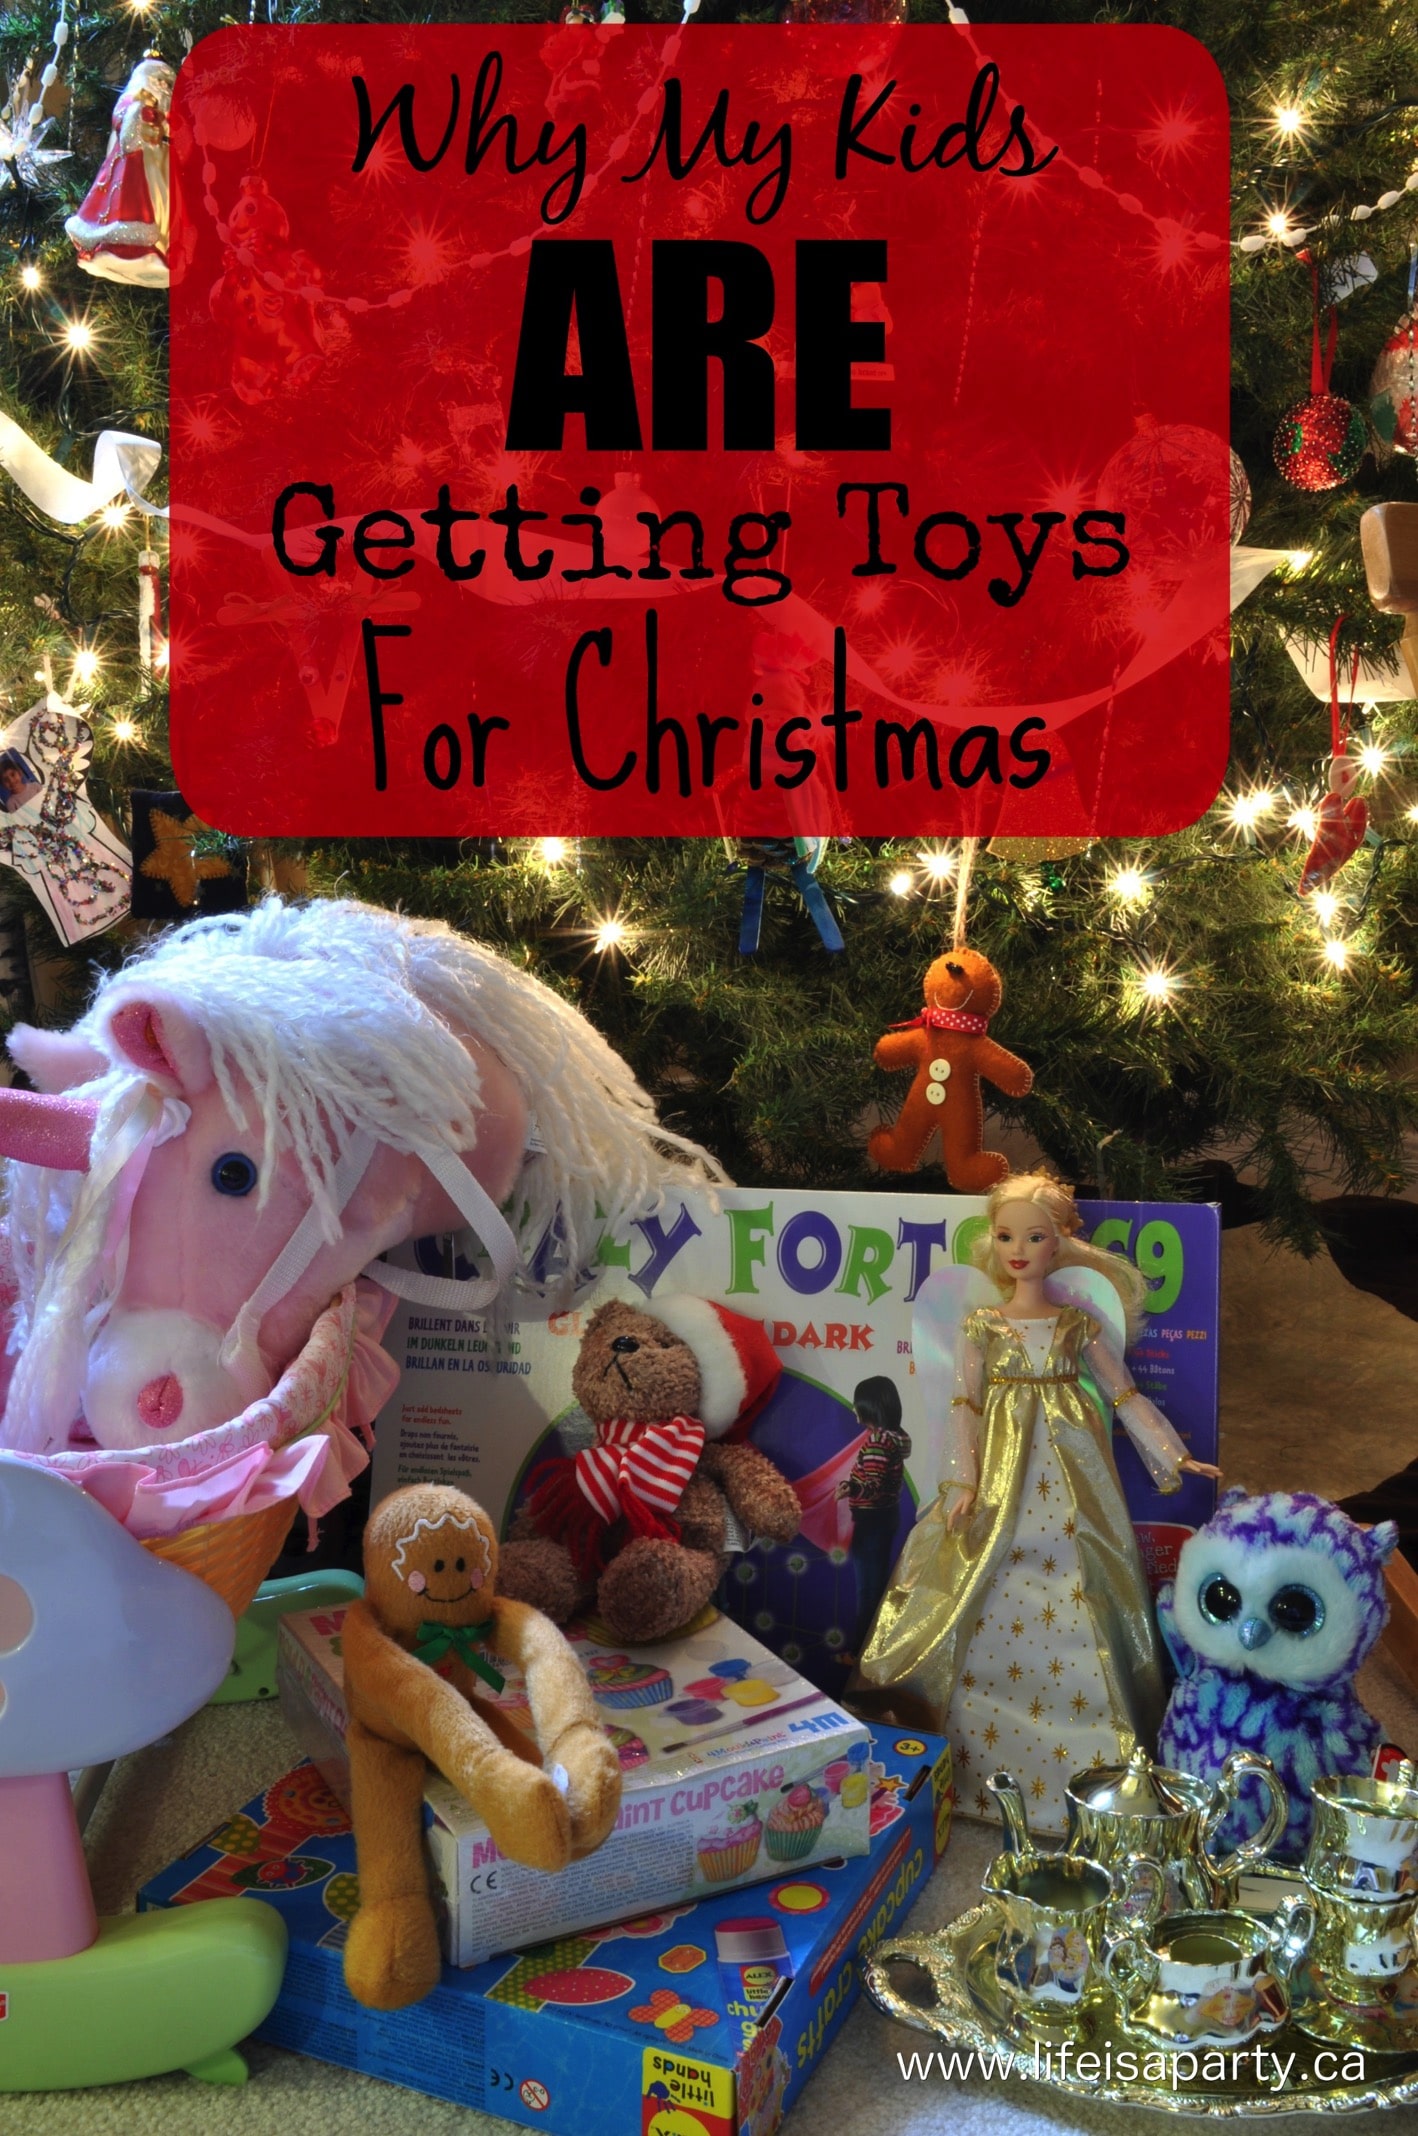 Why my kids ARE getting toys for Christmas: to those who in the "no toys for Chrismtas" camp, so other reasons to consider.